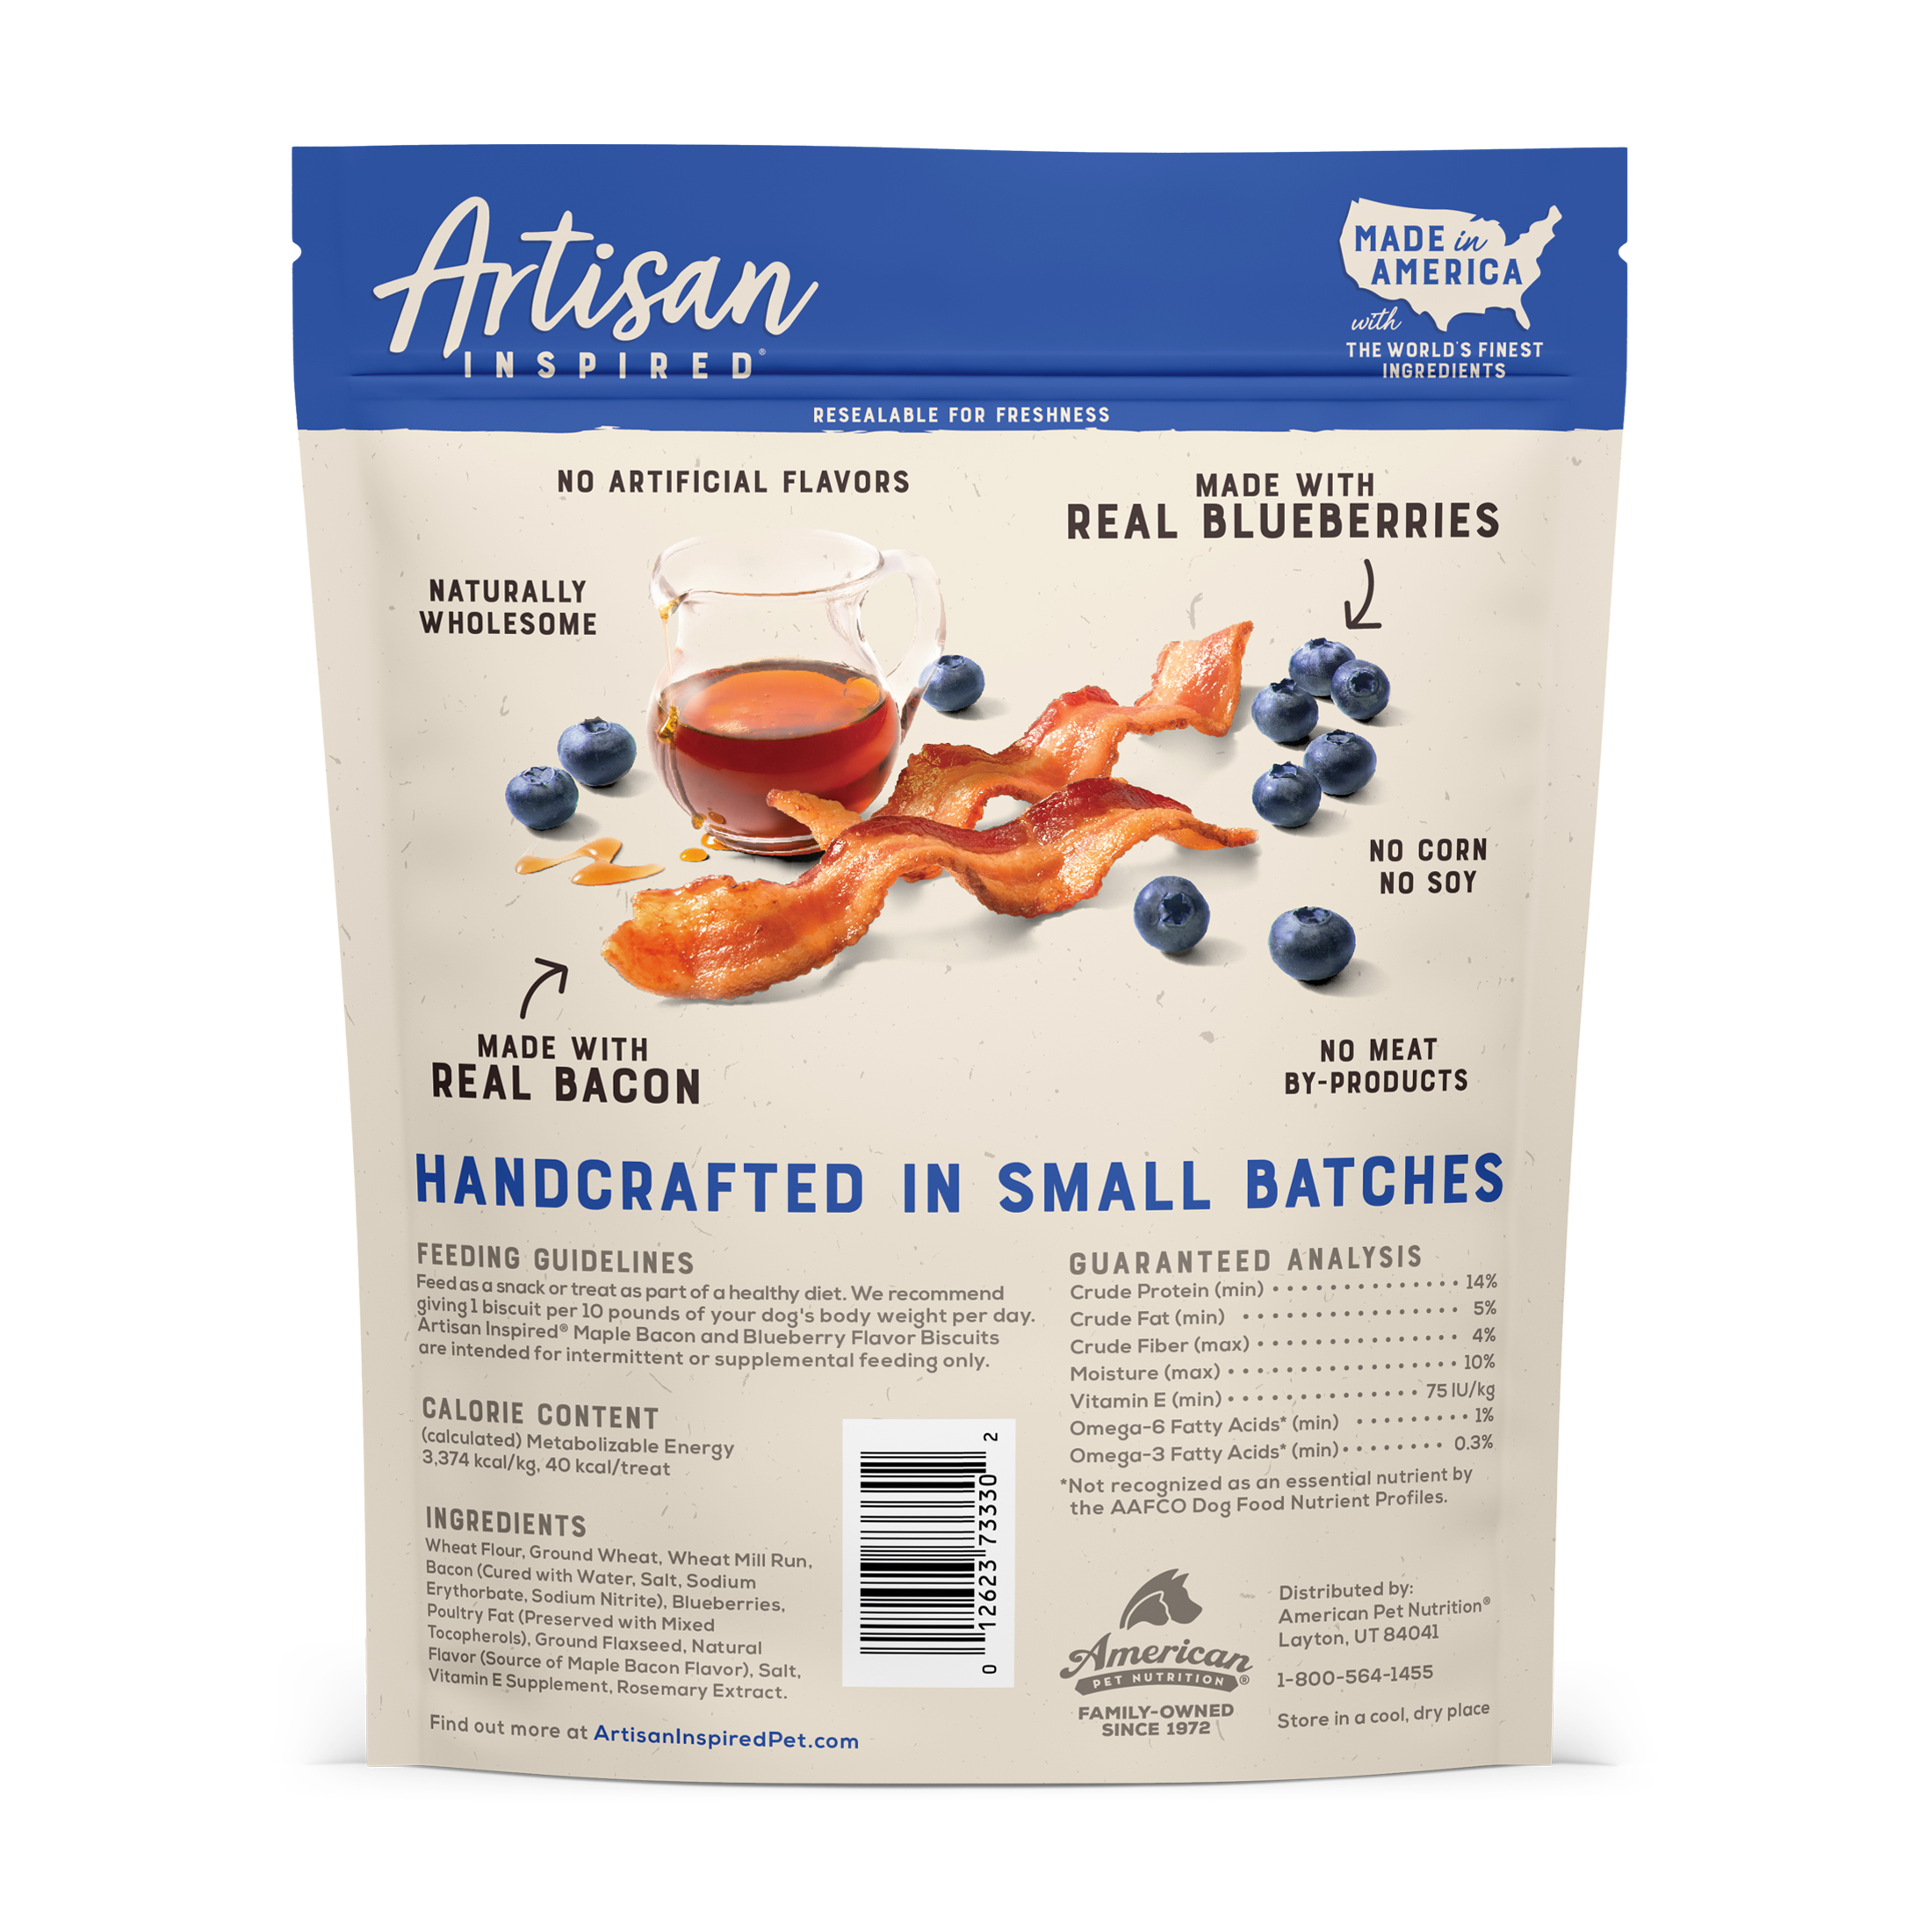 Artisan Inspired Maple Bacon & Blueberry Flavor Biscuits Dog Treats, 16oz bag - image 2 of 9